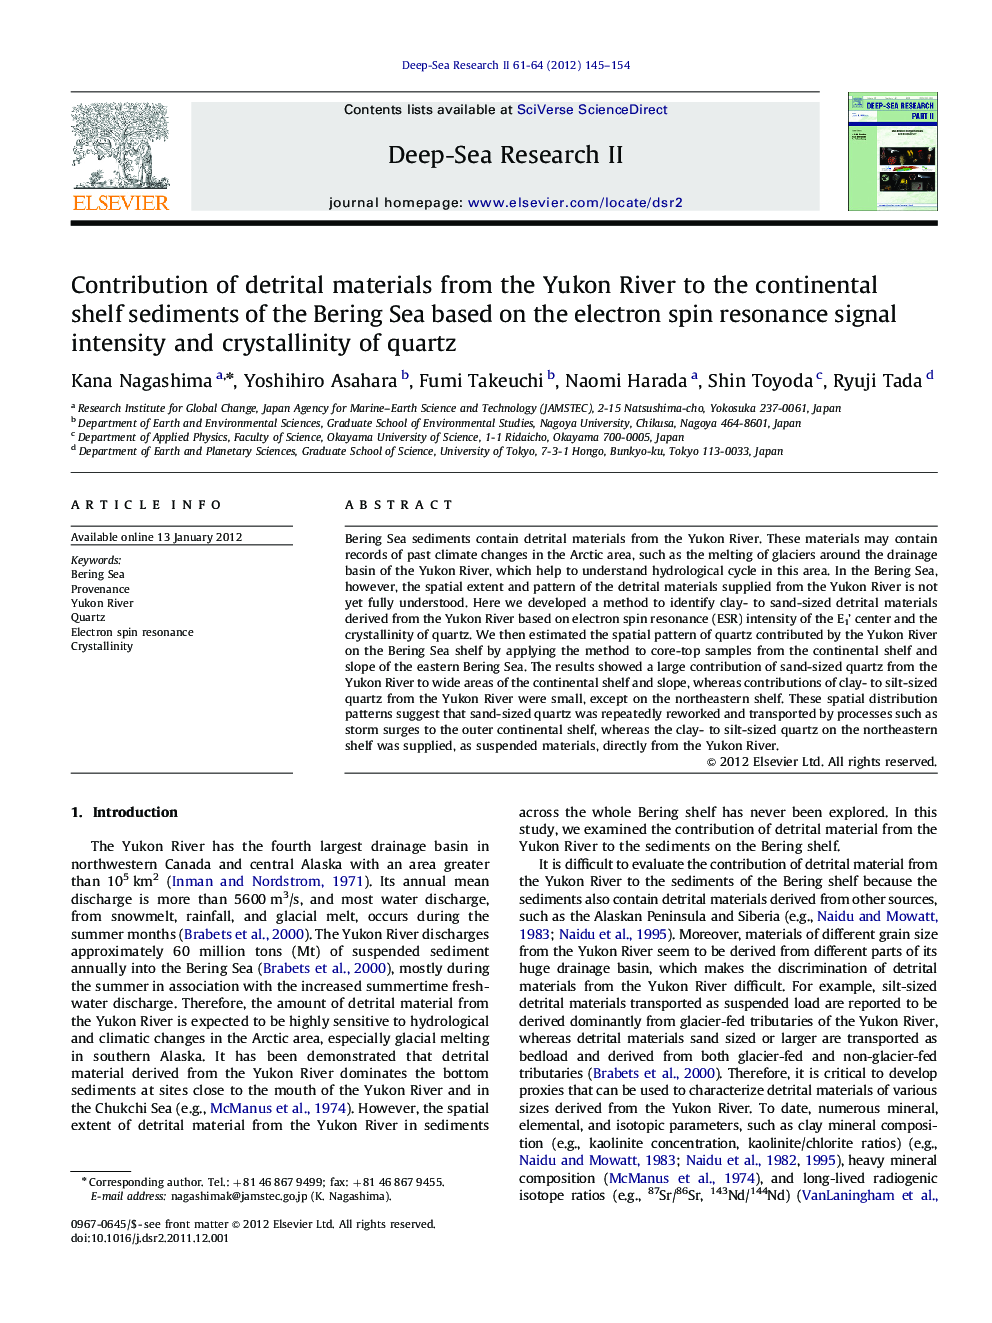 Contribution of detrital materials from the Yukon River to the continental shelf sediments of the Bering Sea based on the electron spin resonance signal intensity and crystallinity of quartz